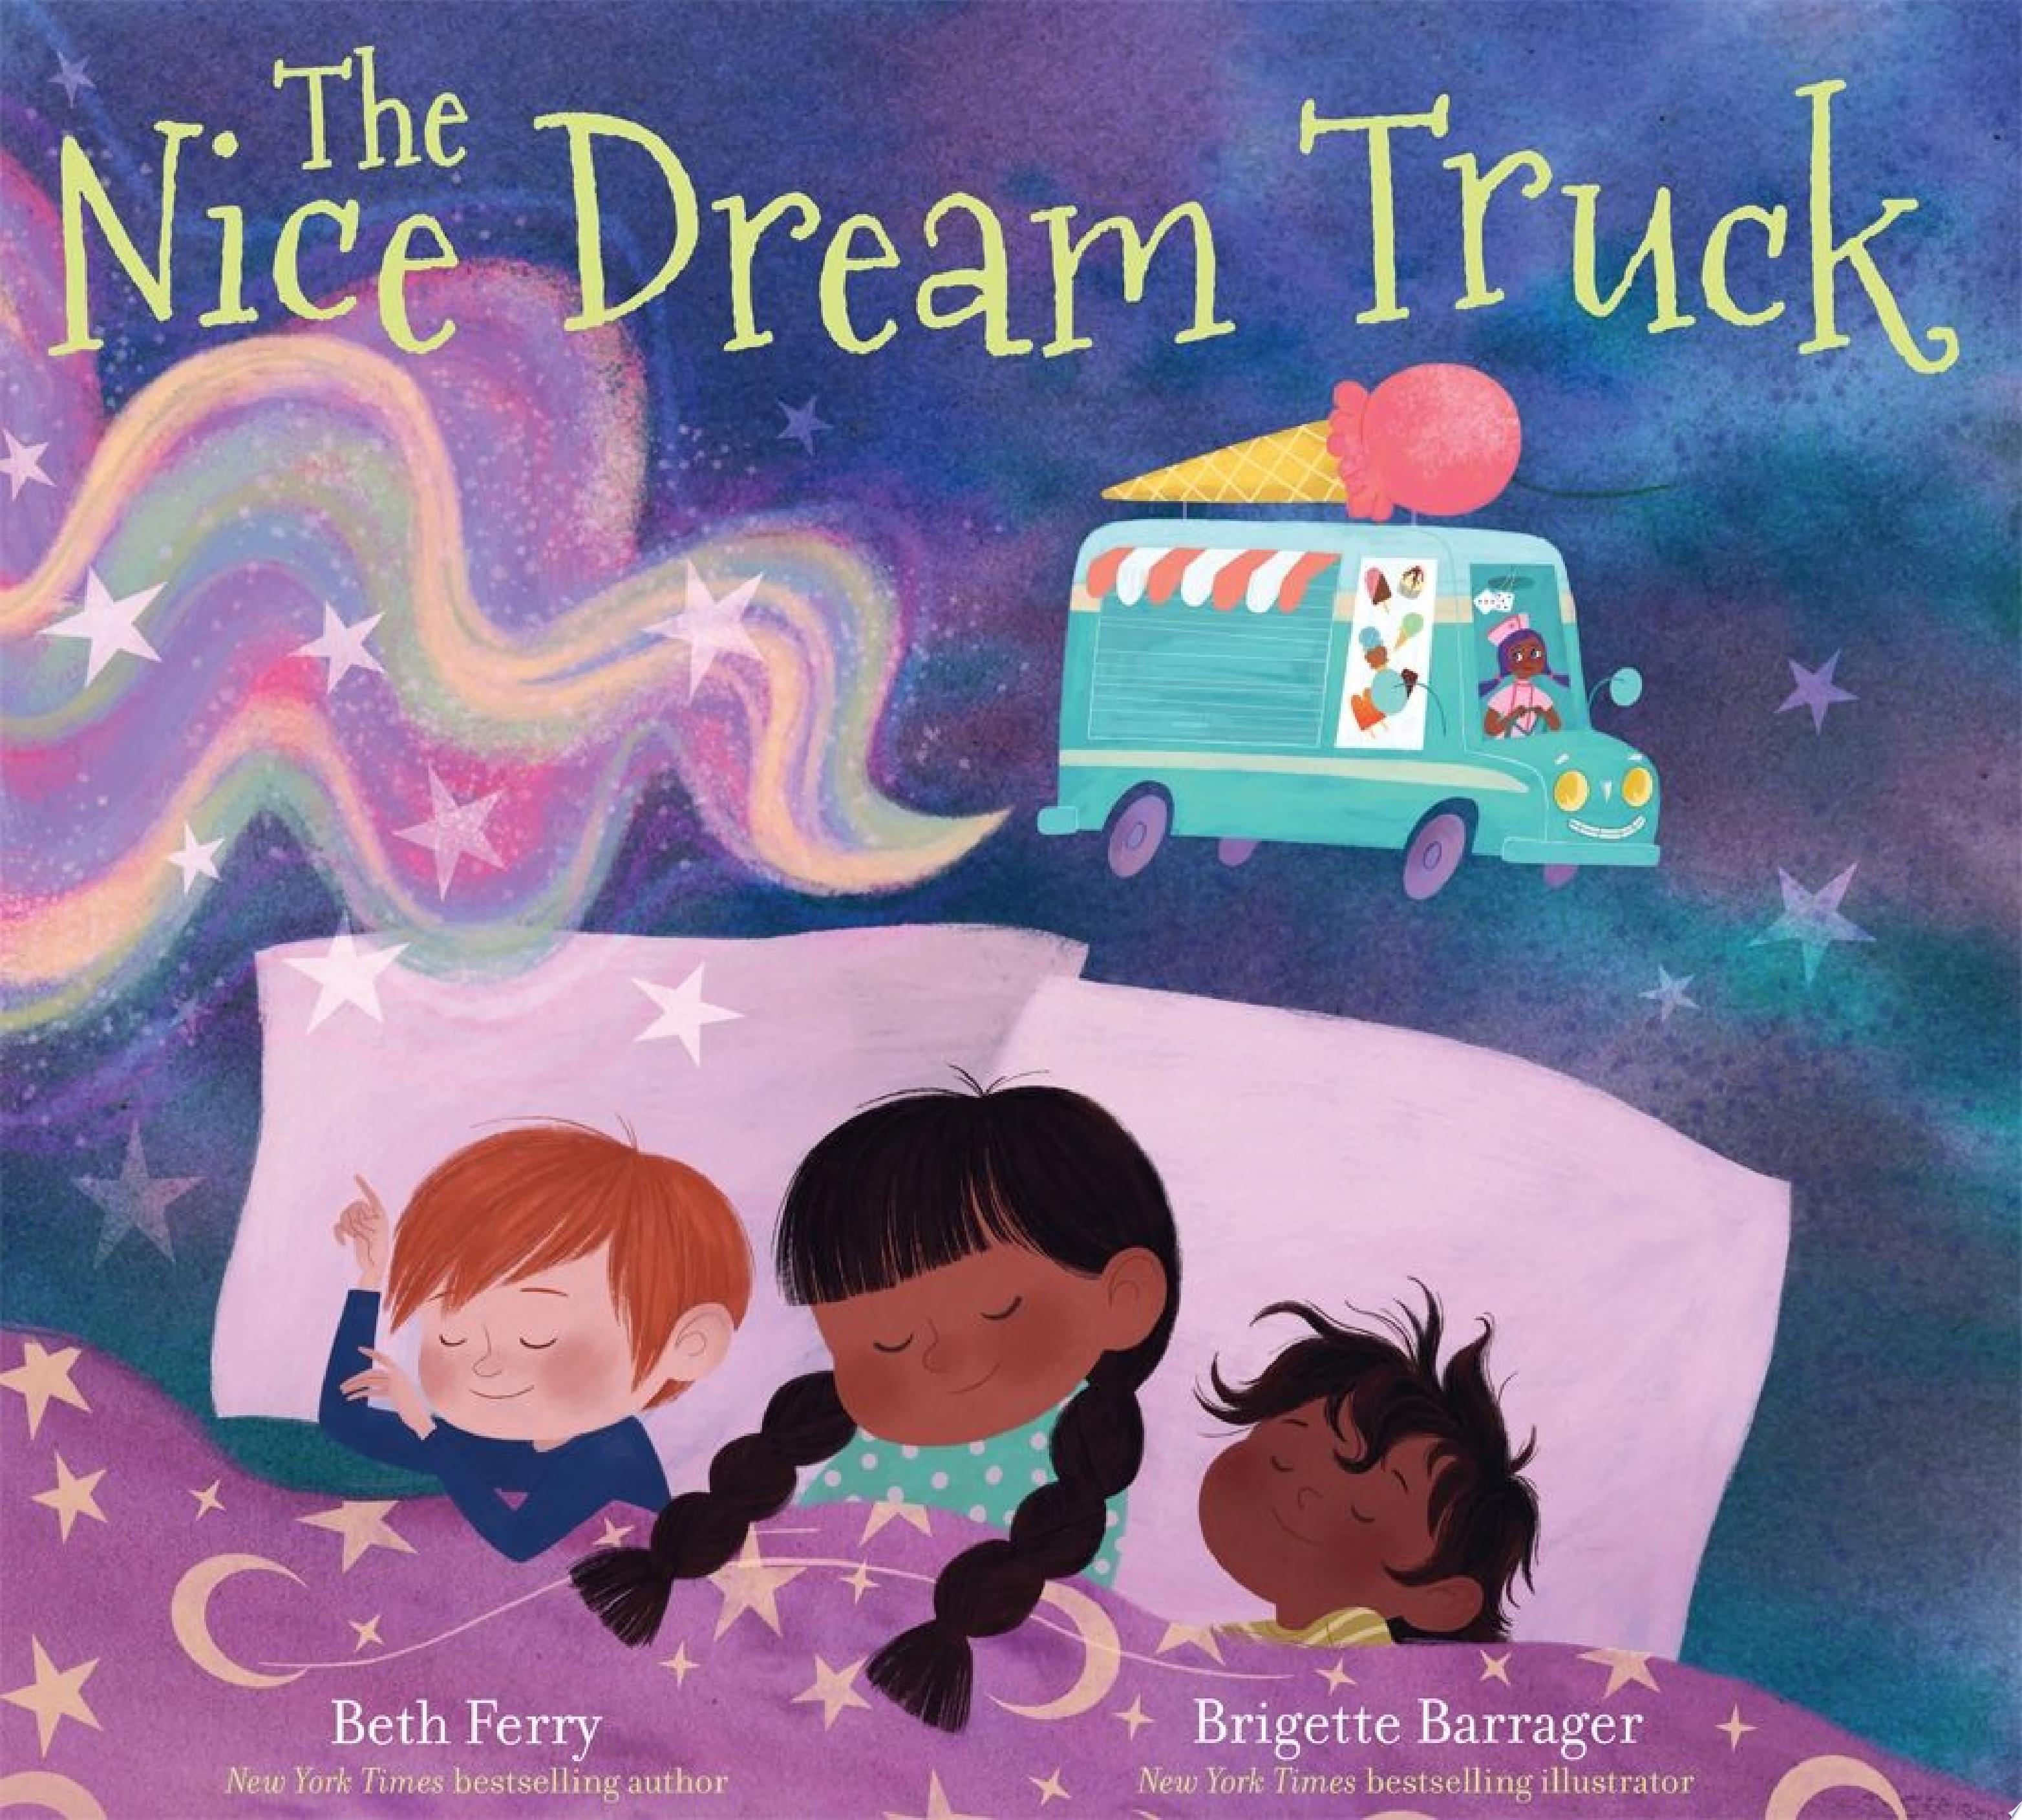 Image for "The Nice Dream Truck"